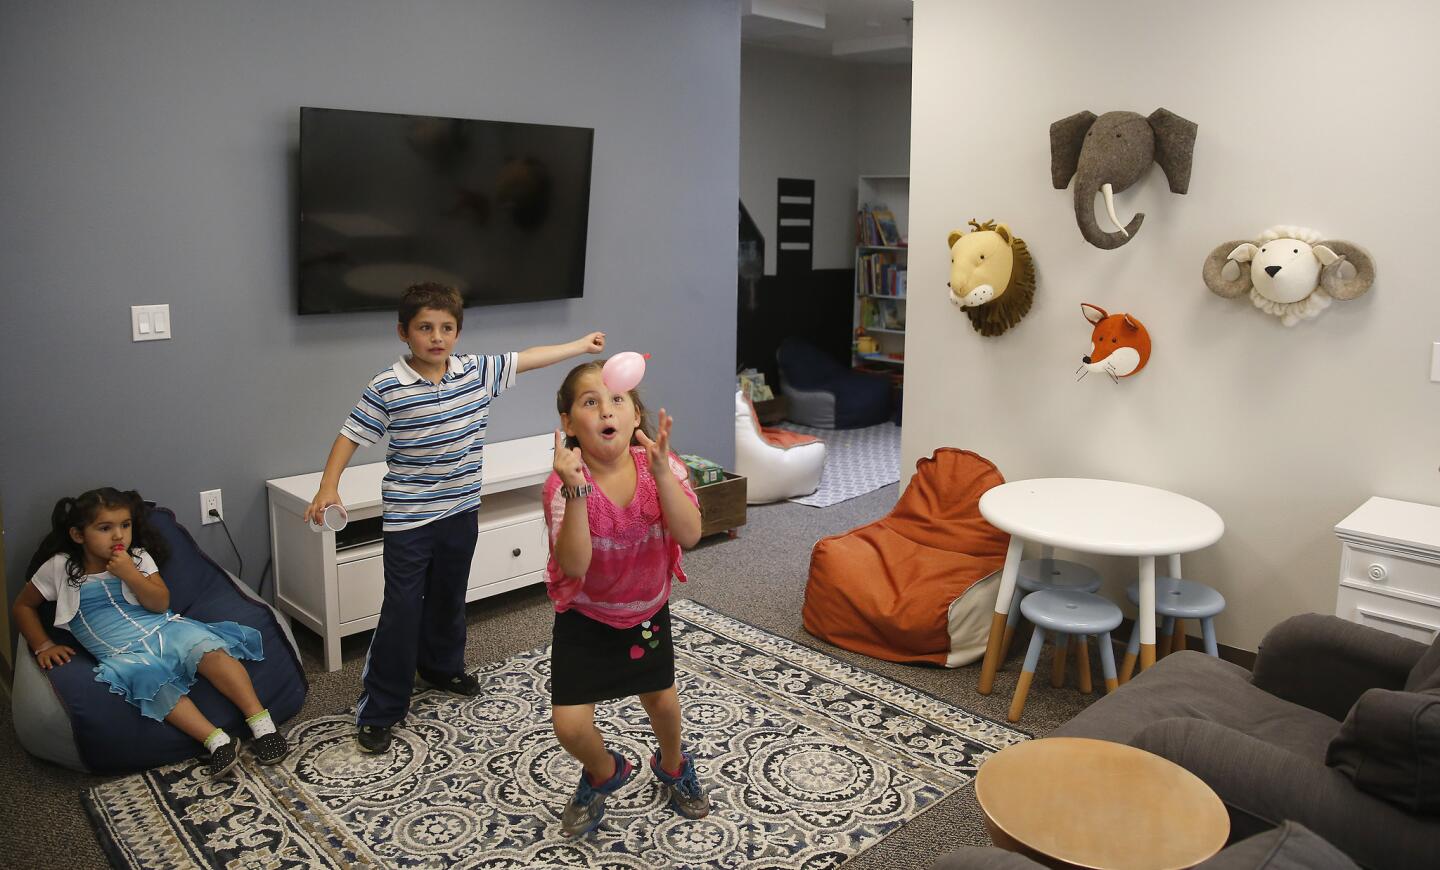 David Tsaturyan, 8, center, plays with his twin sister Diana Tsaturyan, 8, right, and sister Emily Tsaturyan, 4, left, in the living room of the new San Fernando Valley Rescue Mission decorated by interior designer Emily Henderson.